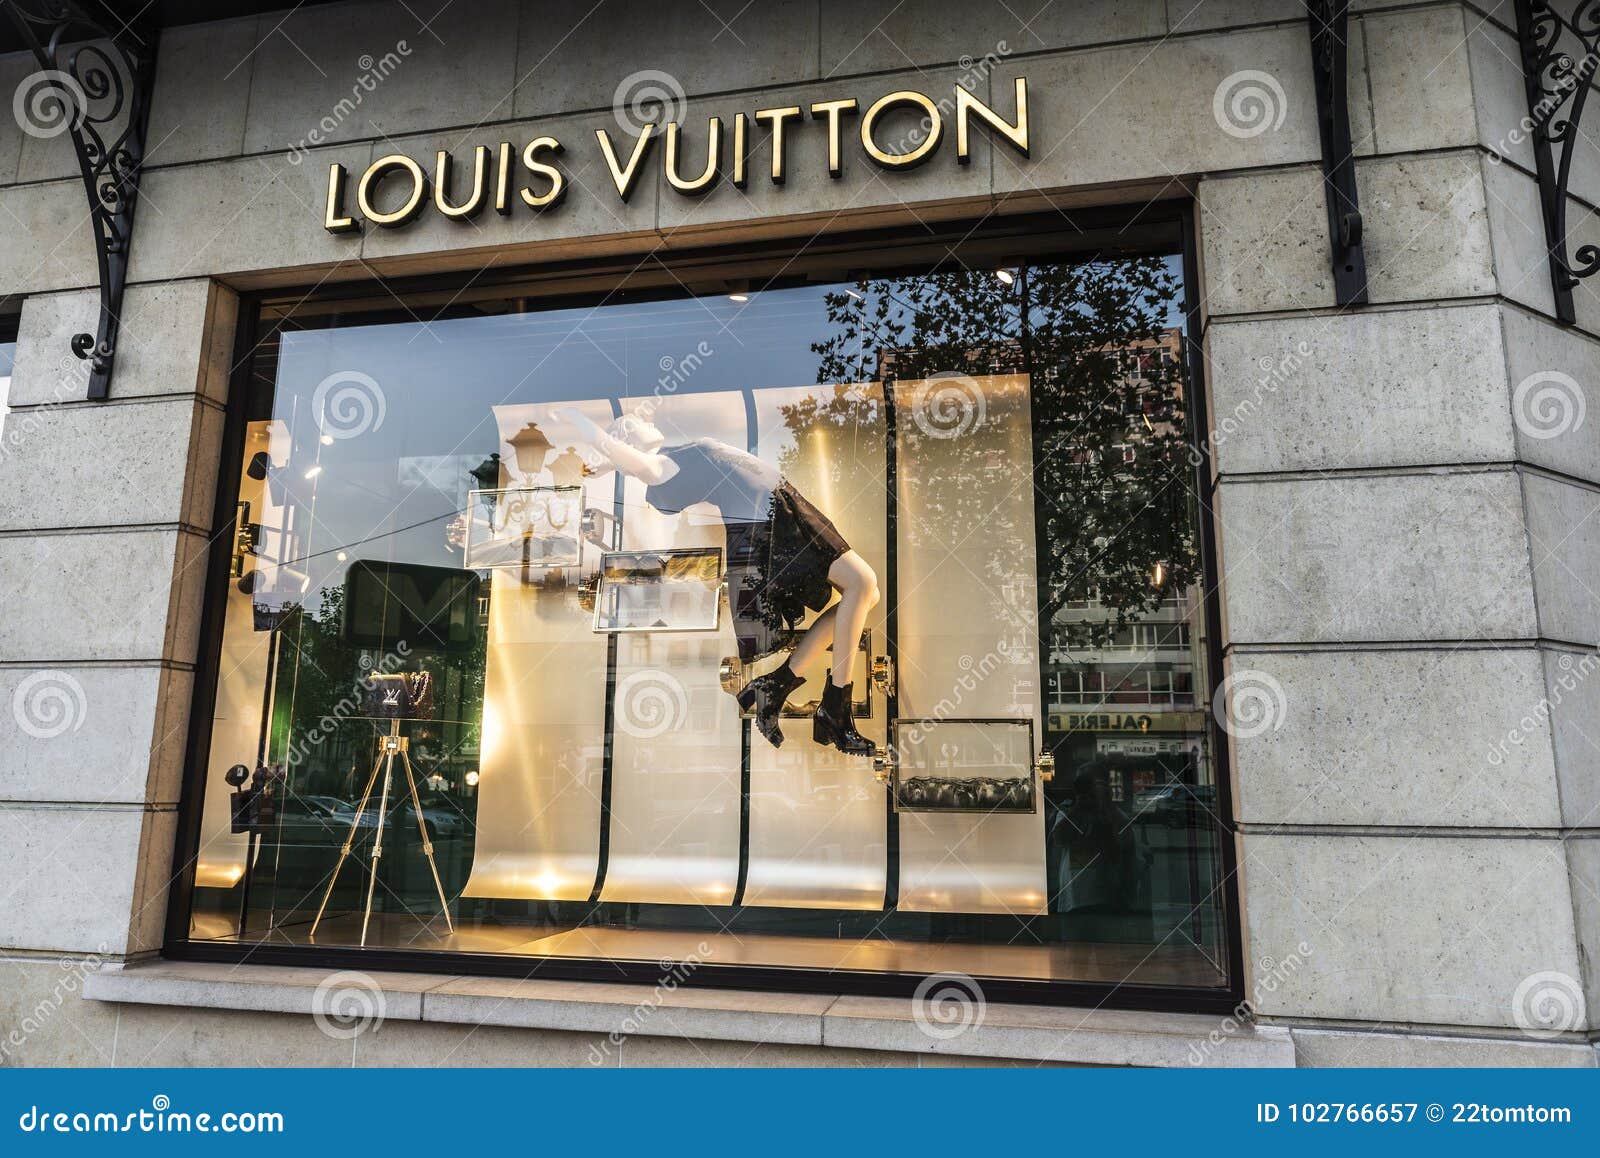 Louis Vuitton Shop In Brussels, Belgium Editorial Photography - Image of business, boutique ...